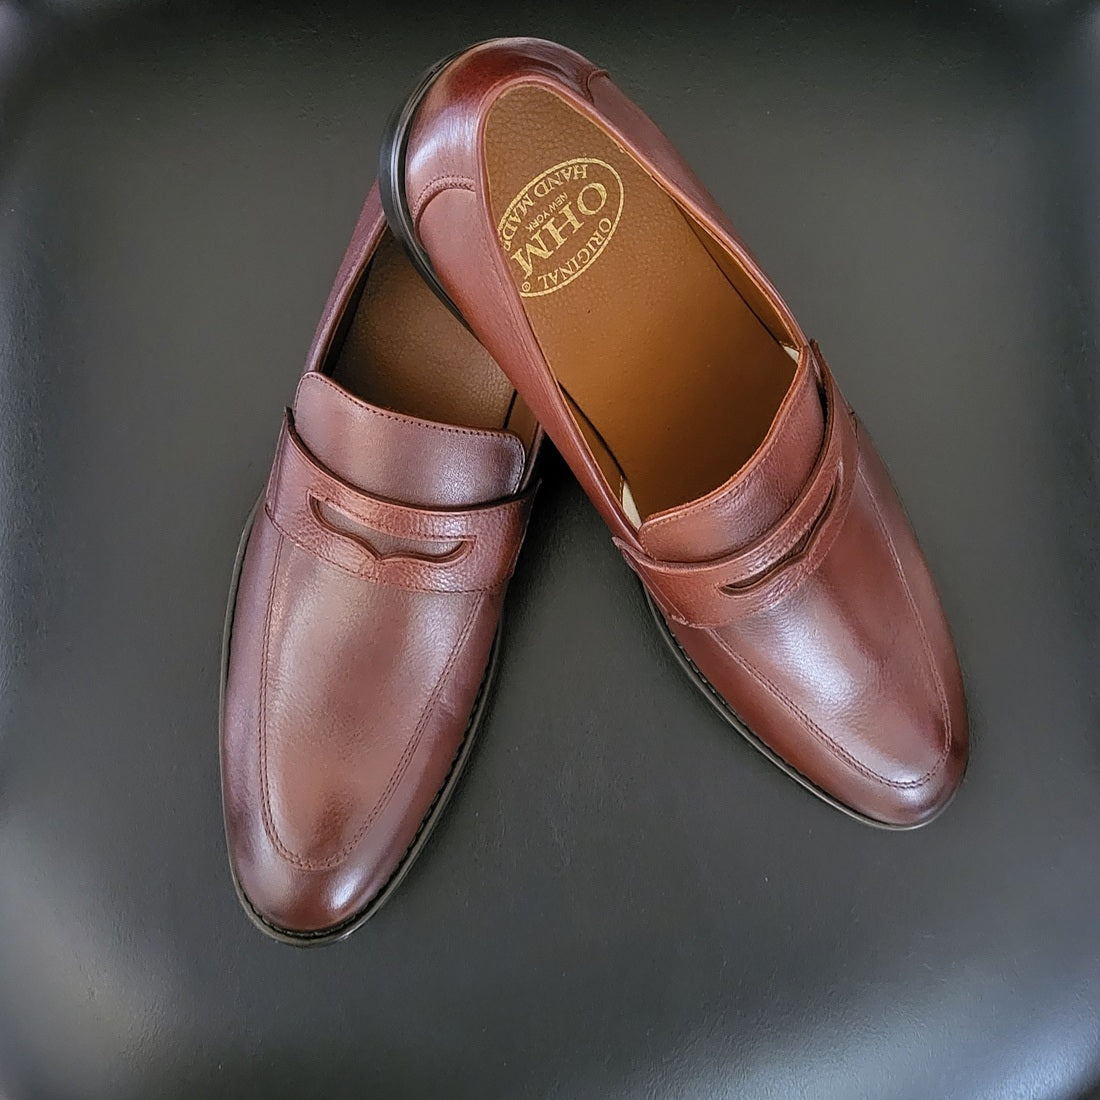 OHM New York Classy Double Stitched Penny Loafer Leather Shoes